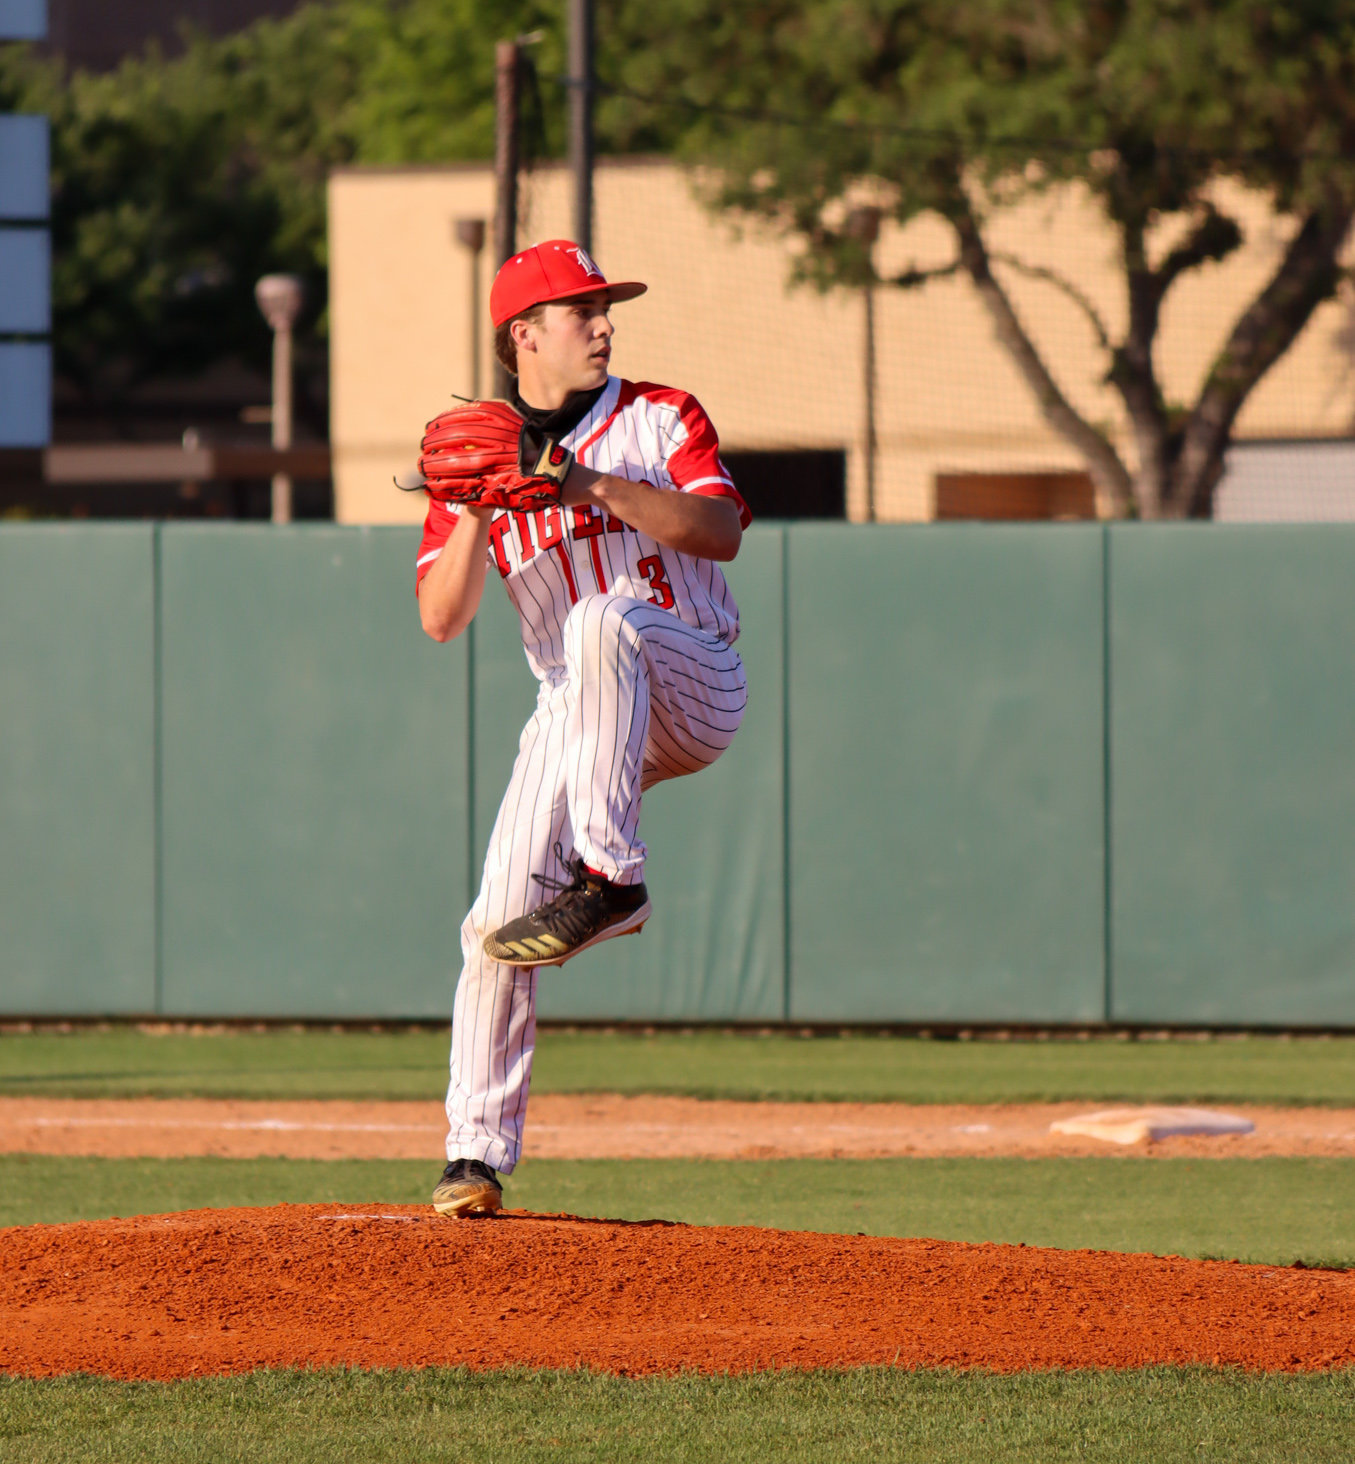 Katy High senior Caleb Matthews prepares to deliver a pitch against Seven Lakes on Tuesday, April 20, at Katy High.